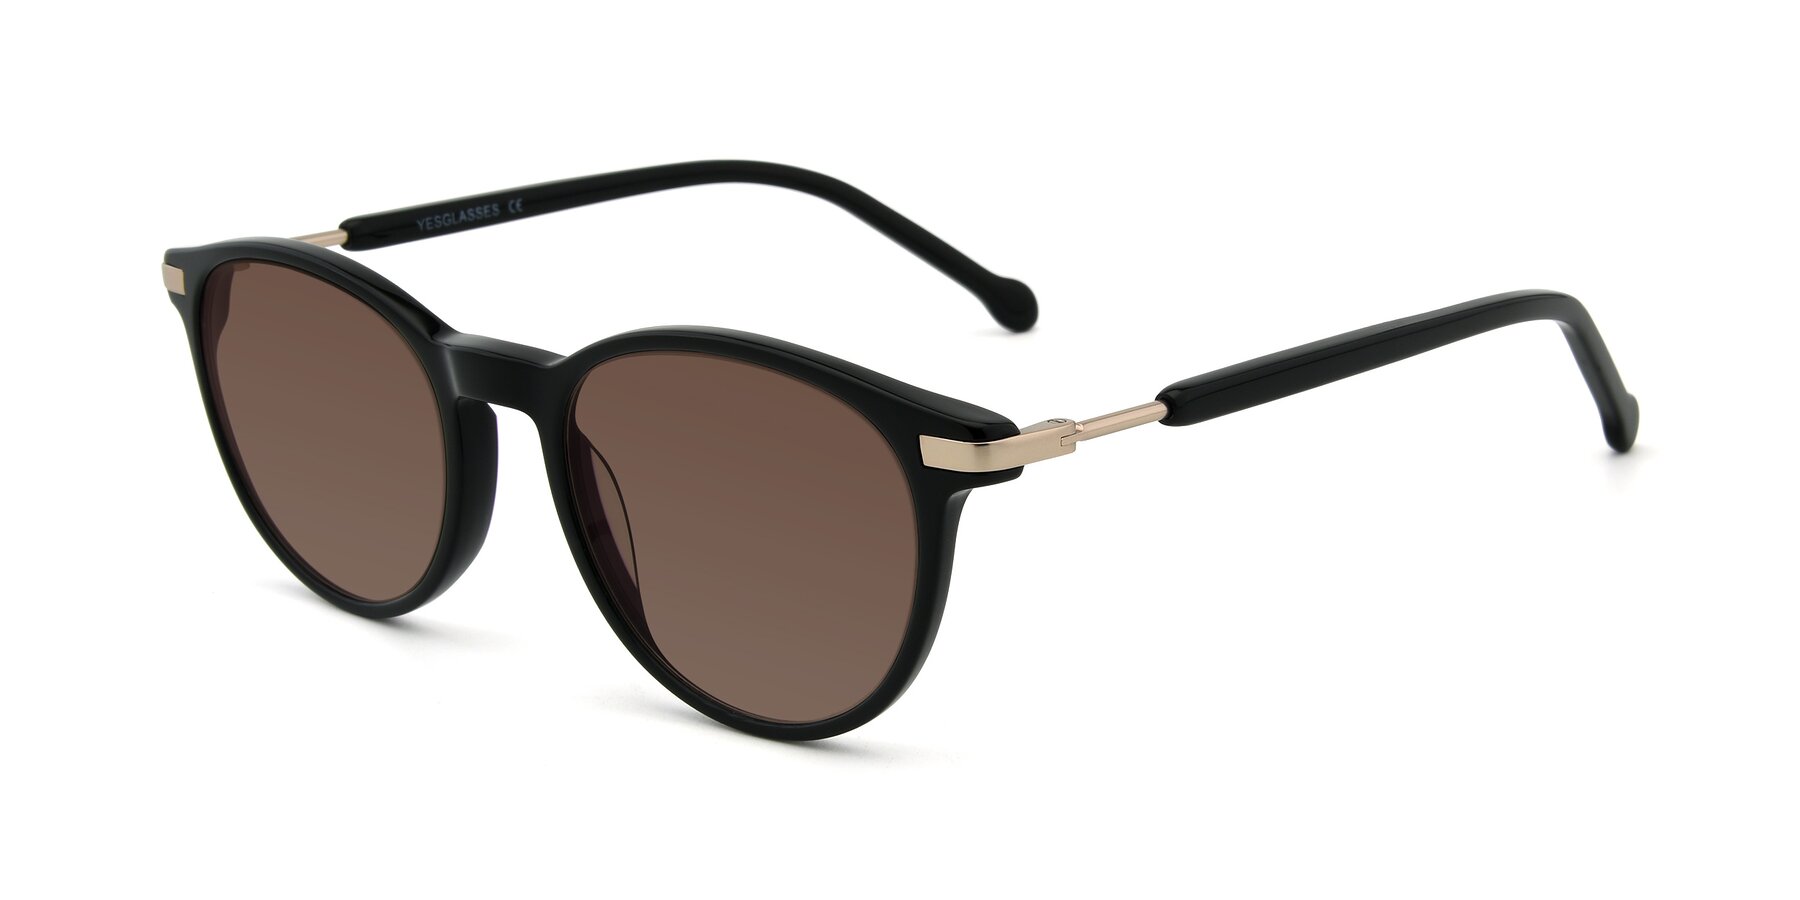 Angle of 17429 in Black with Brown Tinted Lenses